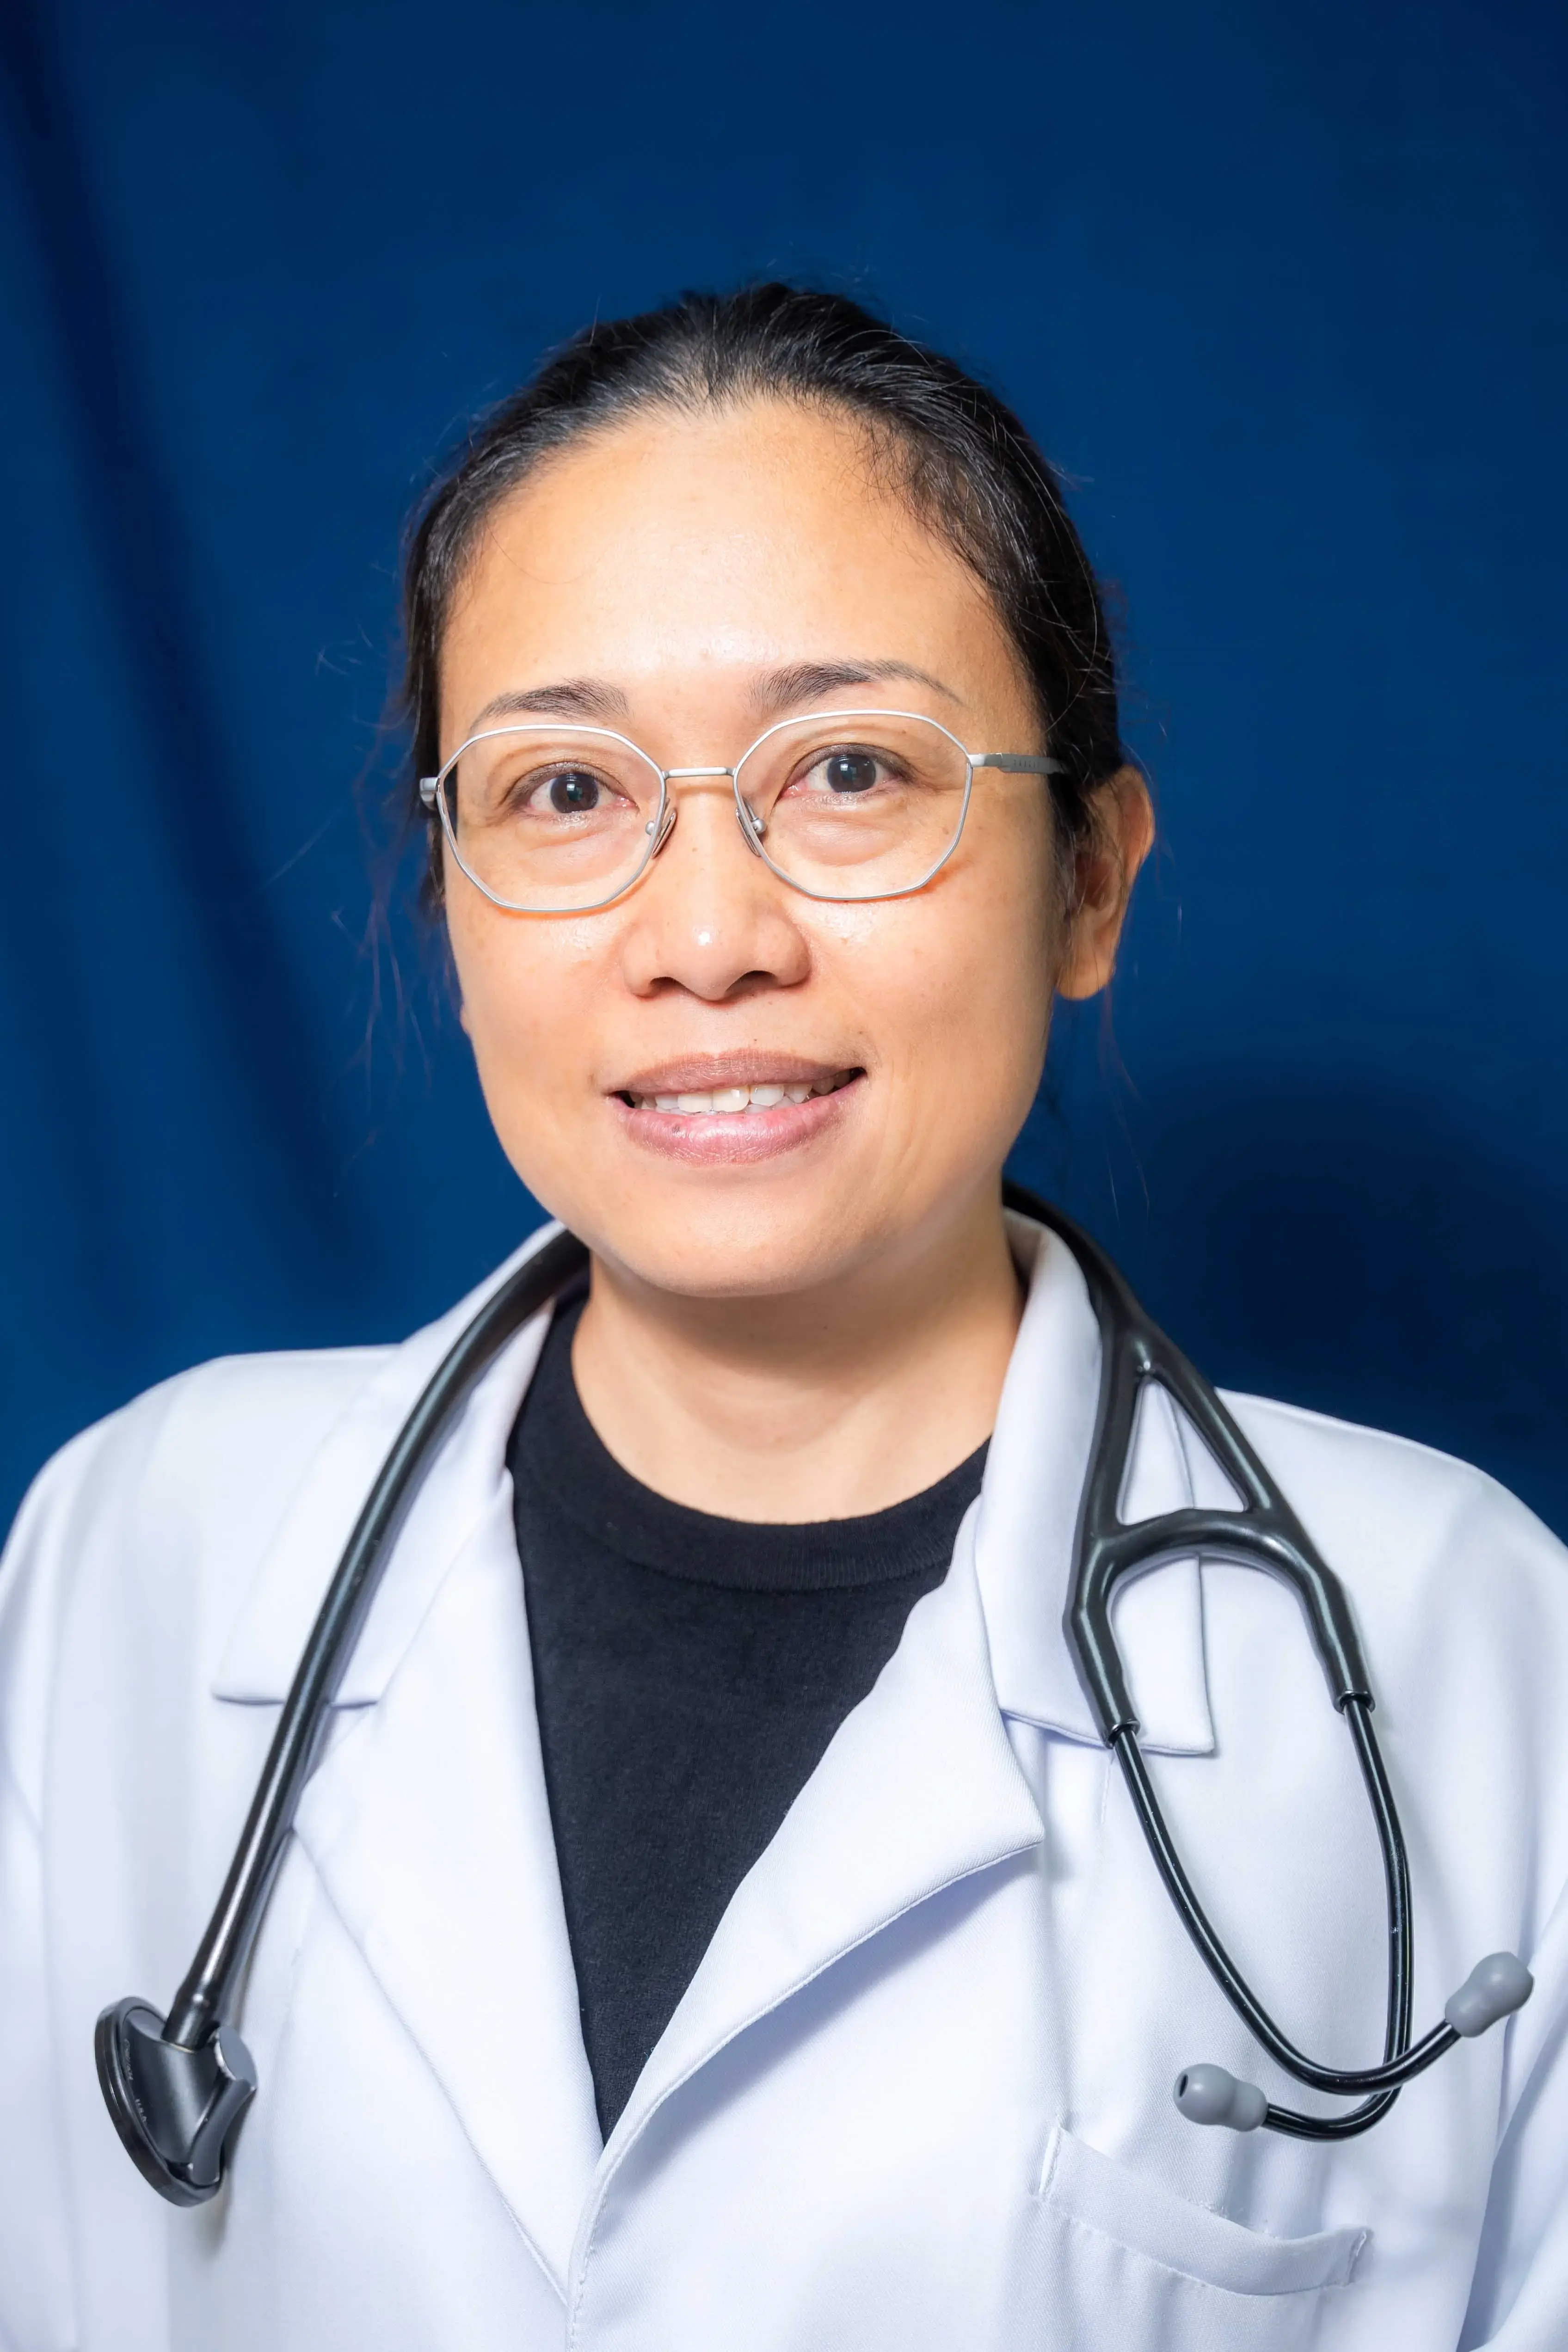 Dr. Caryl Labe